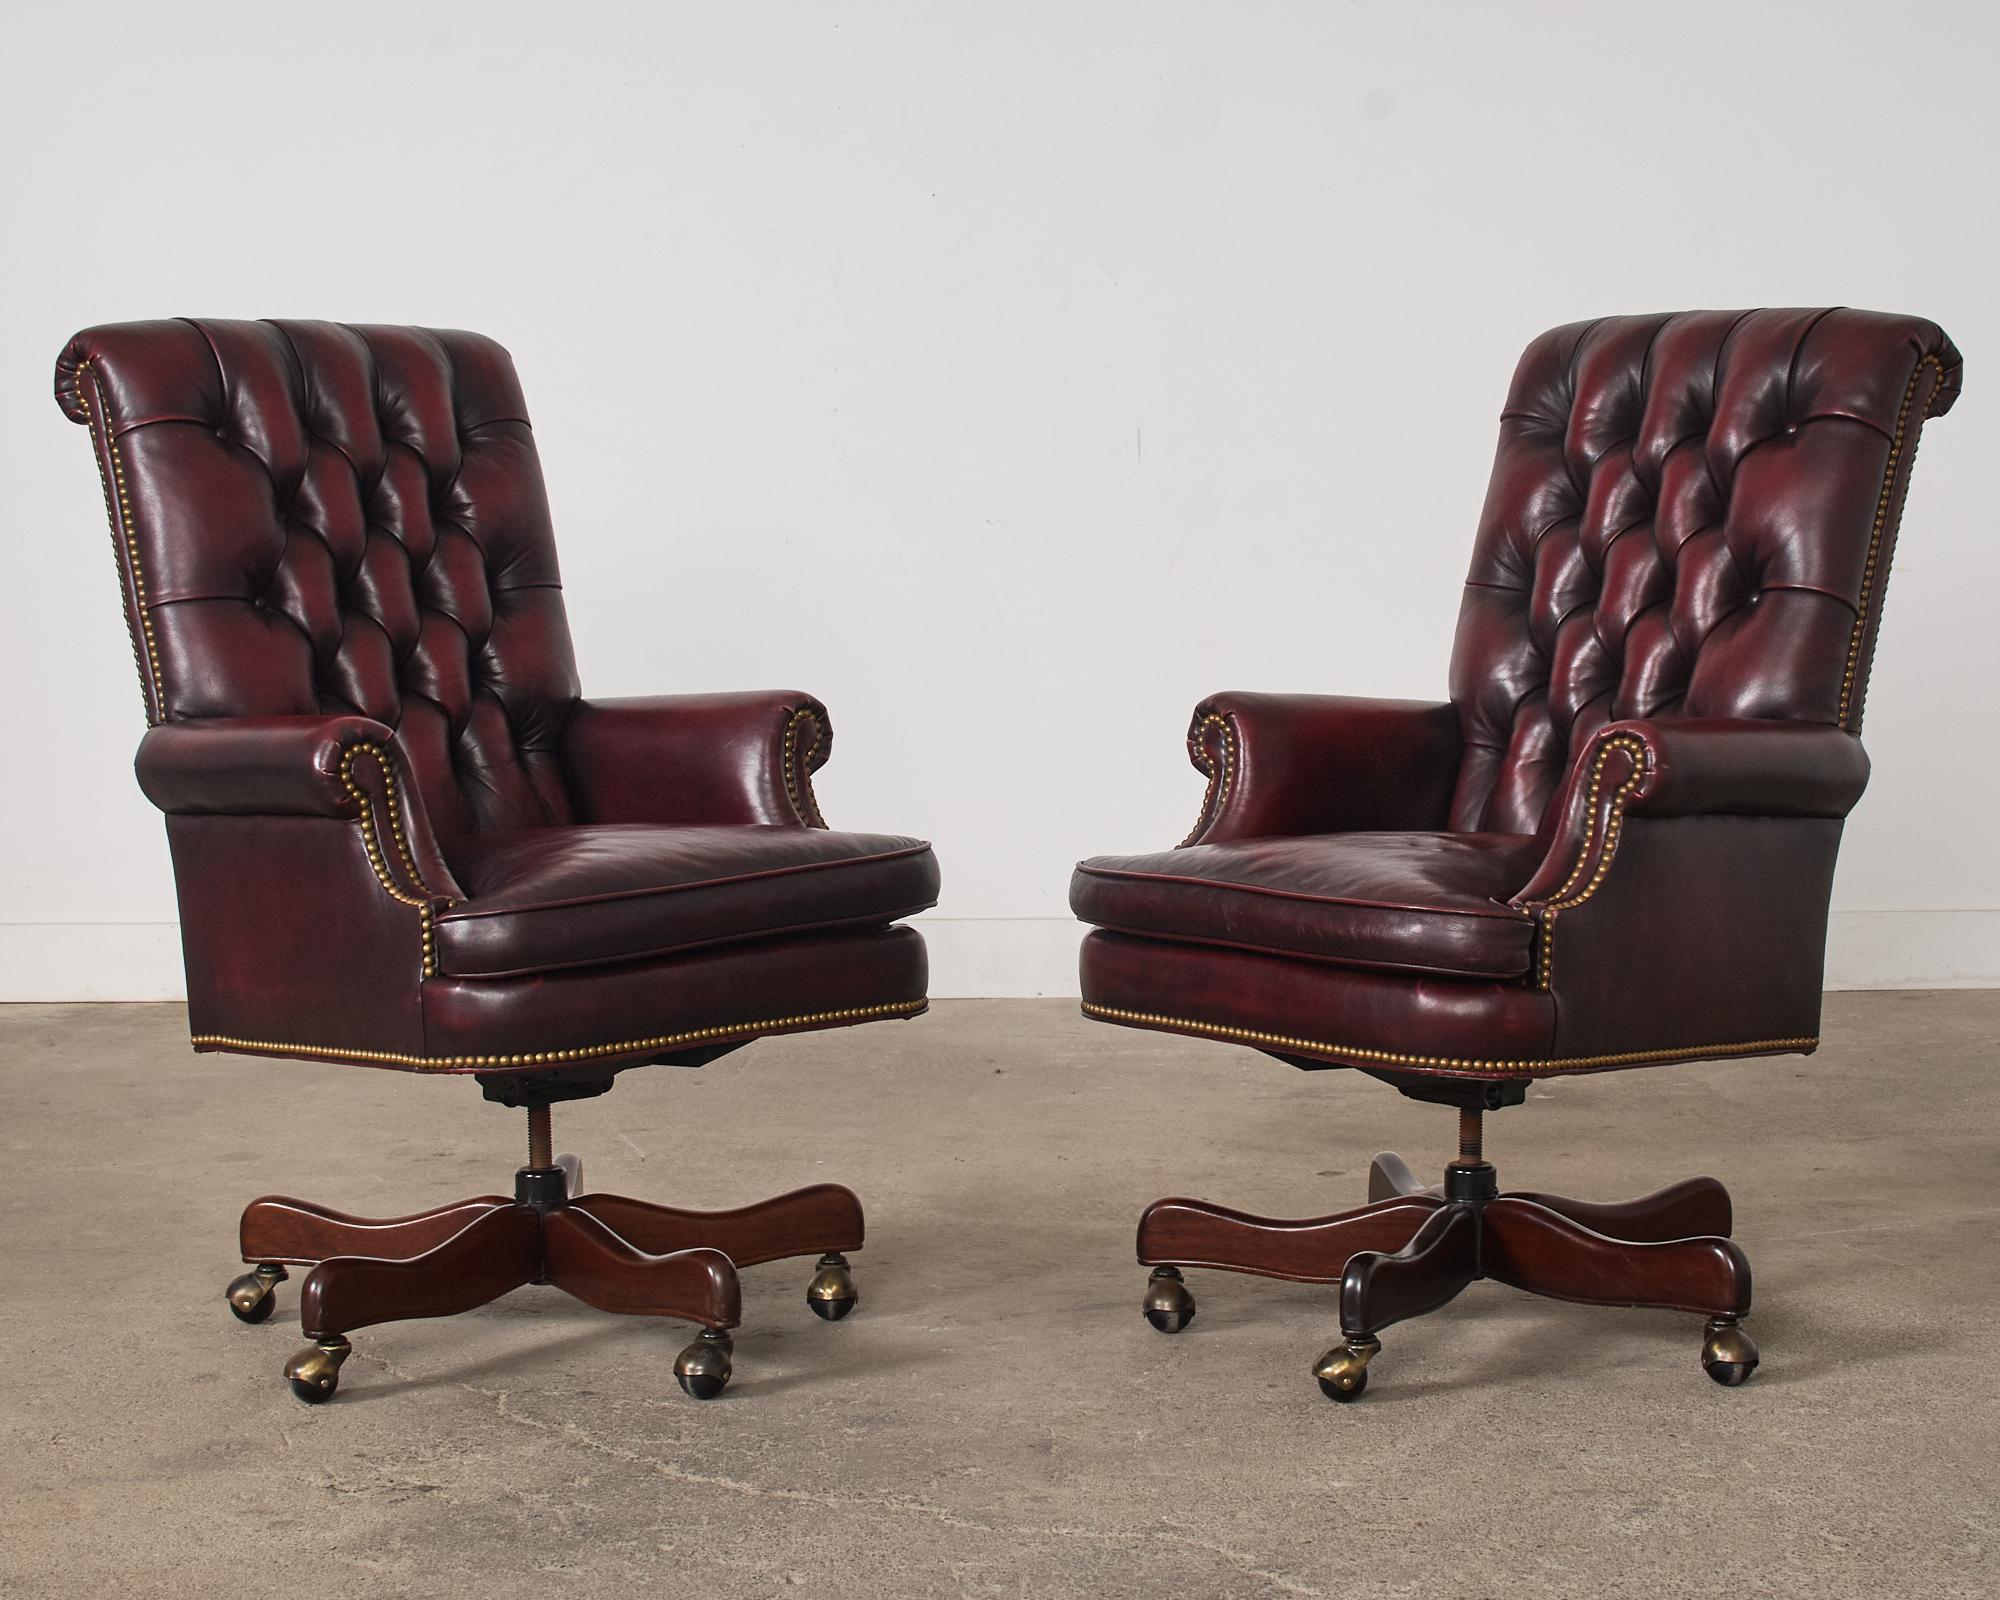 Classic matching pair of Chesterfield cordovan executive office swivel tilt armchairs made in the English Georgian taste. The chairs feature a leather tufted seat with a regency style scrolled back and English rolled arms. The generous seat has a